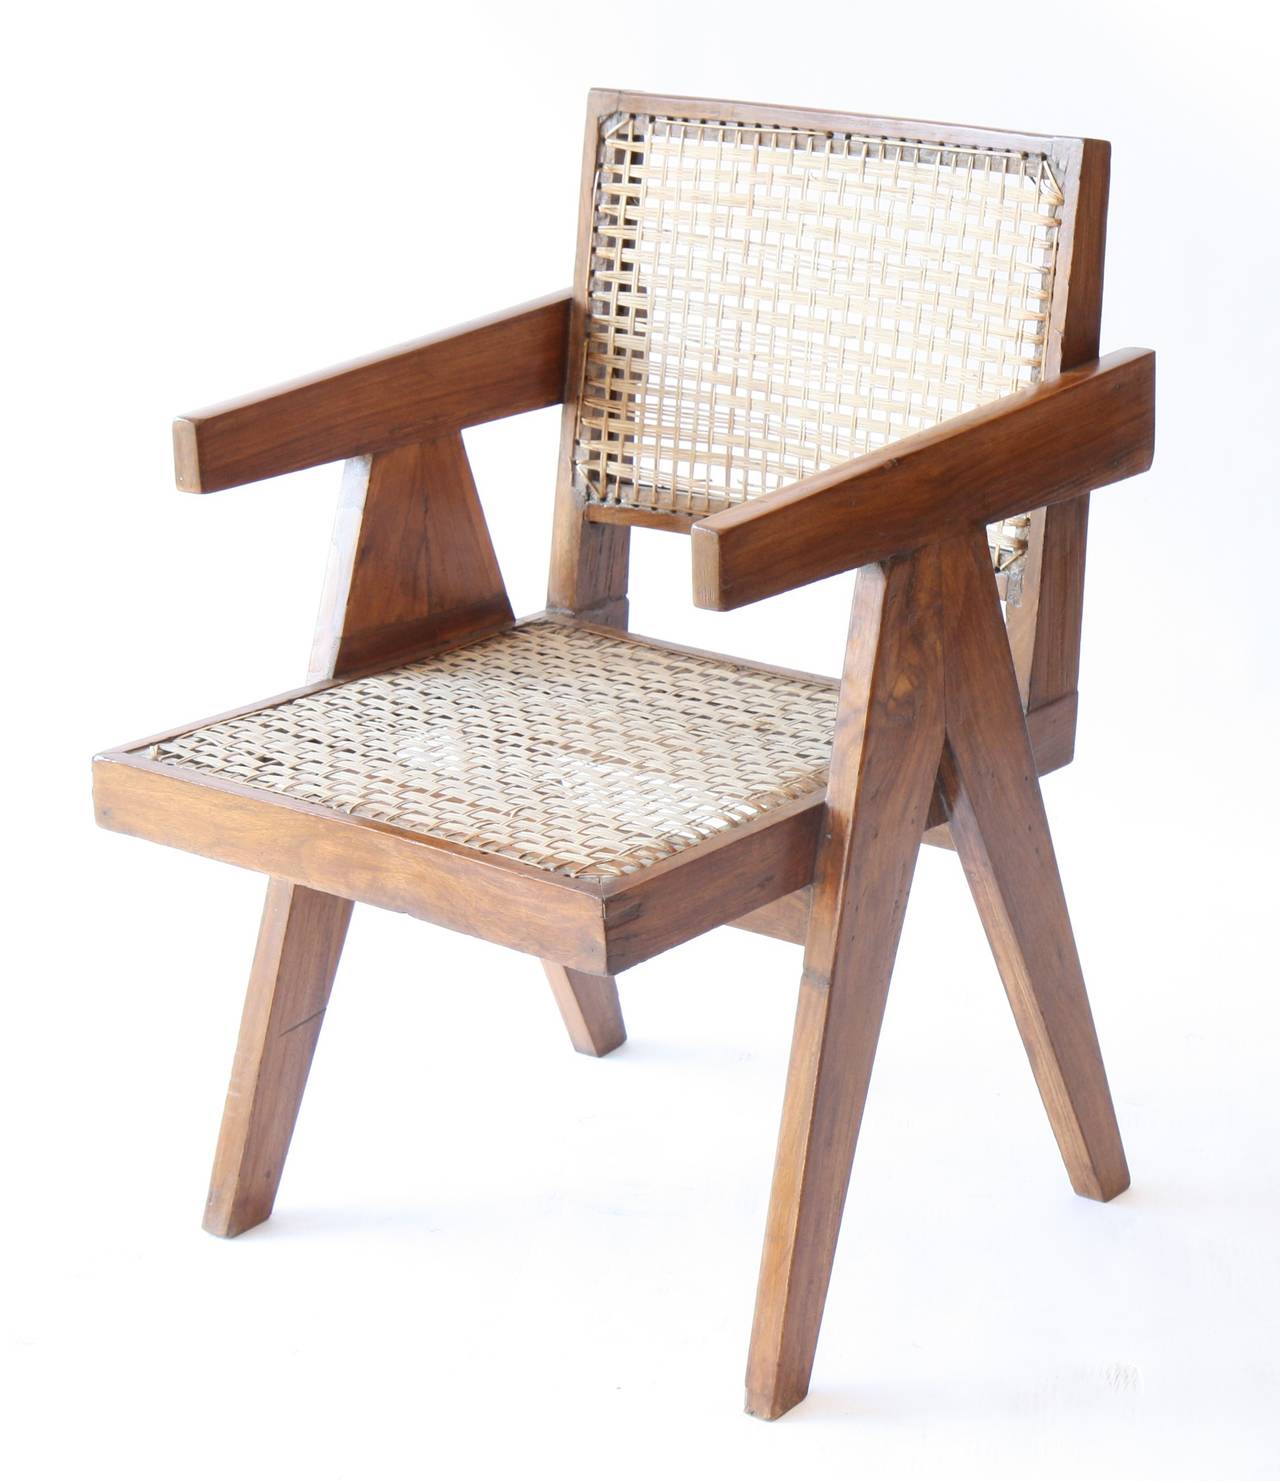 Pierre Jeanneret (1896-1967).
Armchair called "office cane chairs."
In teak, with bended and slightly curved back.
Detached armrests profiled on side compass feet.
The back is fixed to the seat by two small fixtures.
Cane seat and